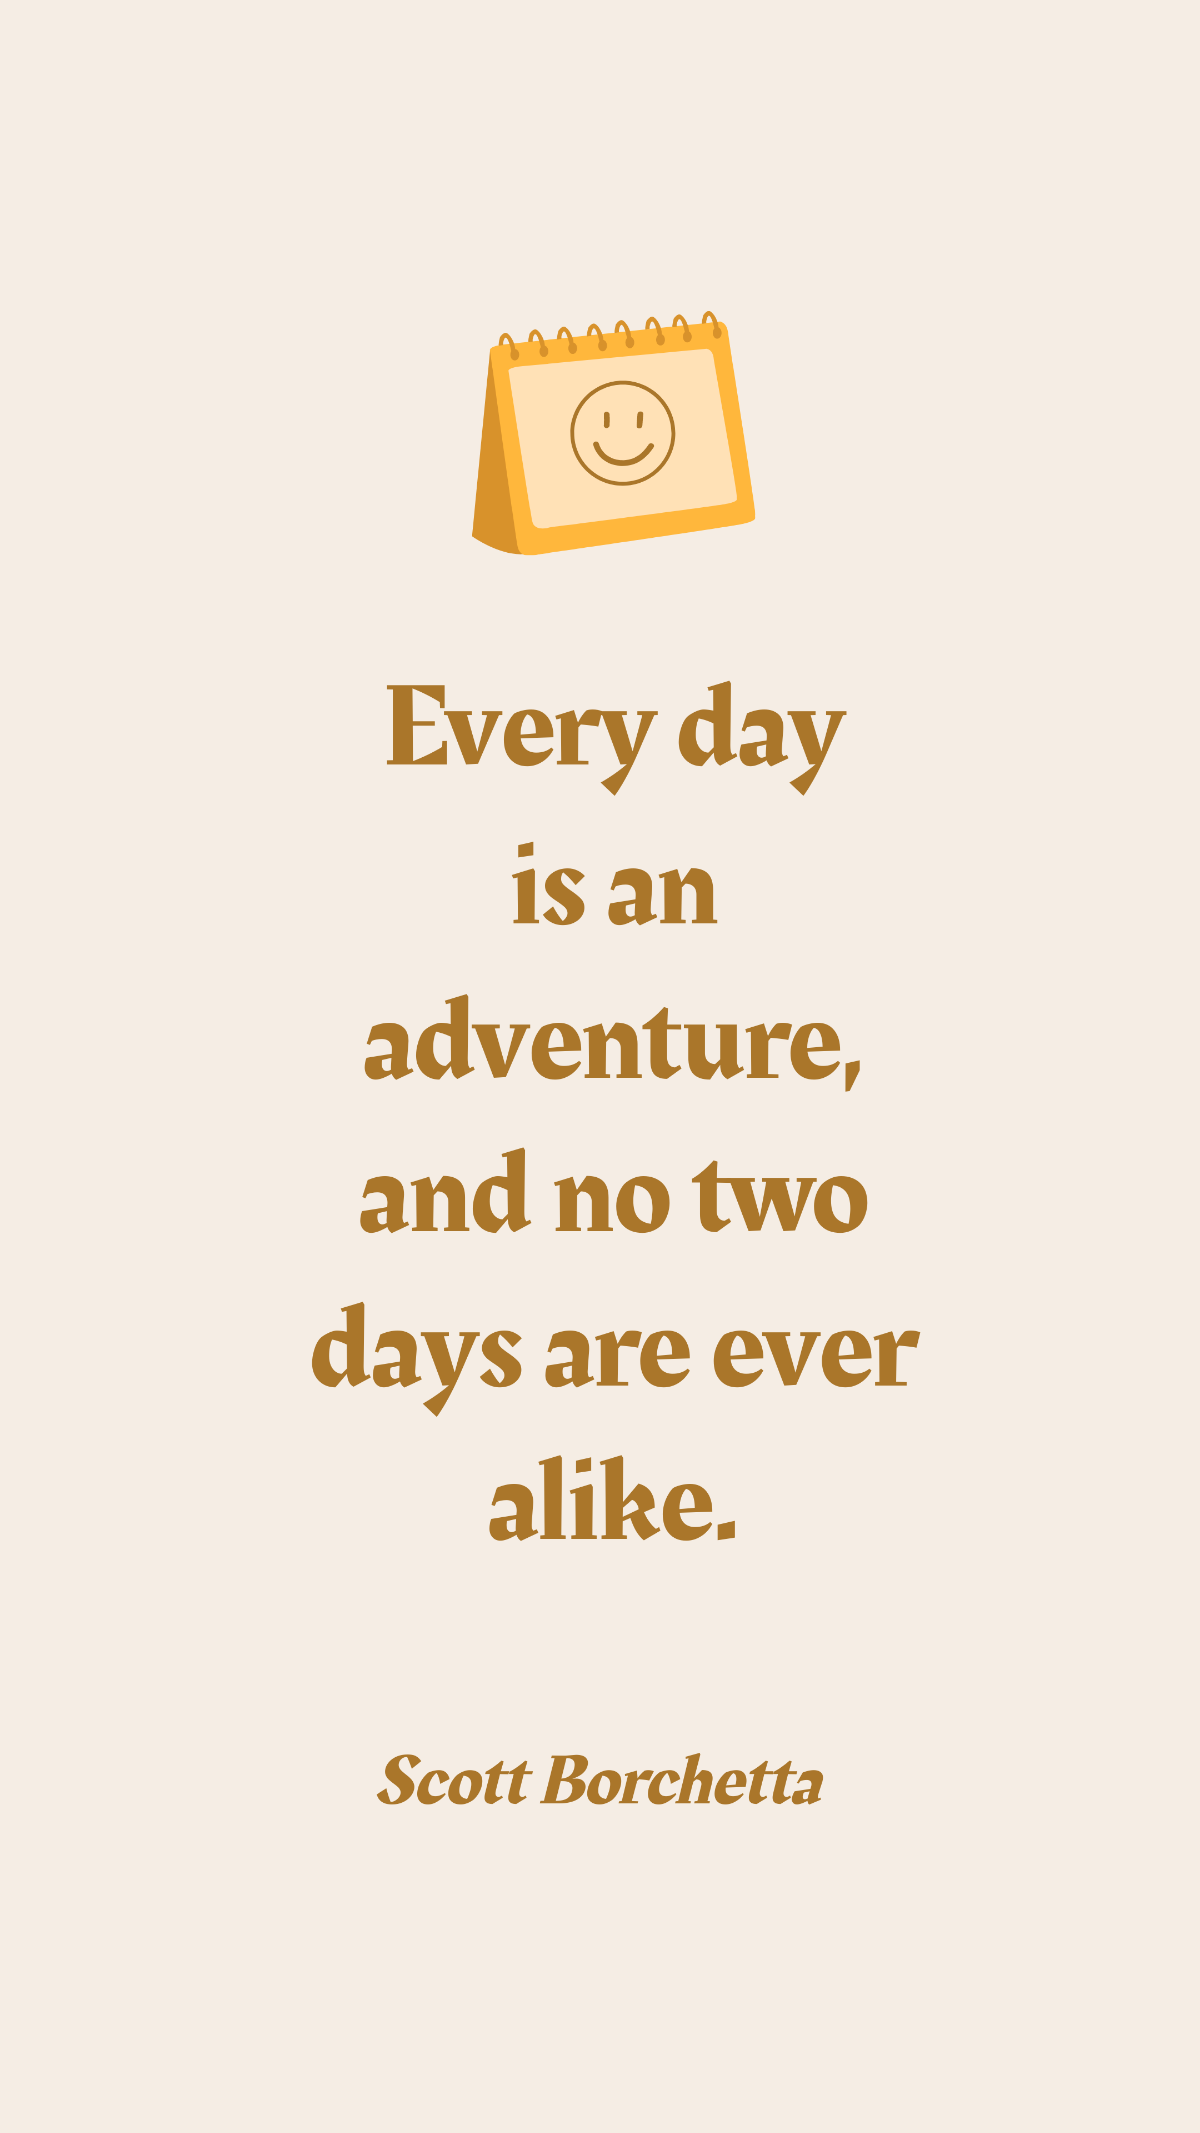 Scott Borchetta - Every day is an adventure, and no two days are ever alike.